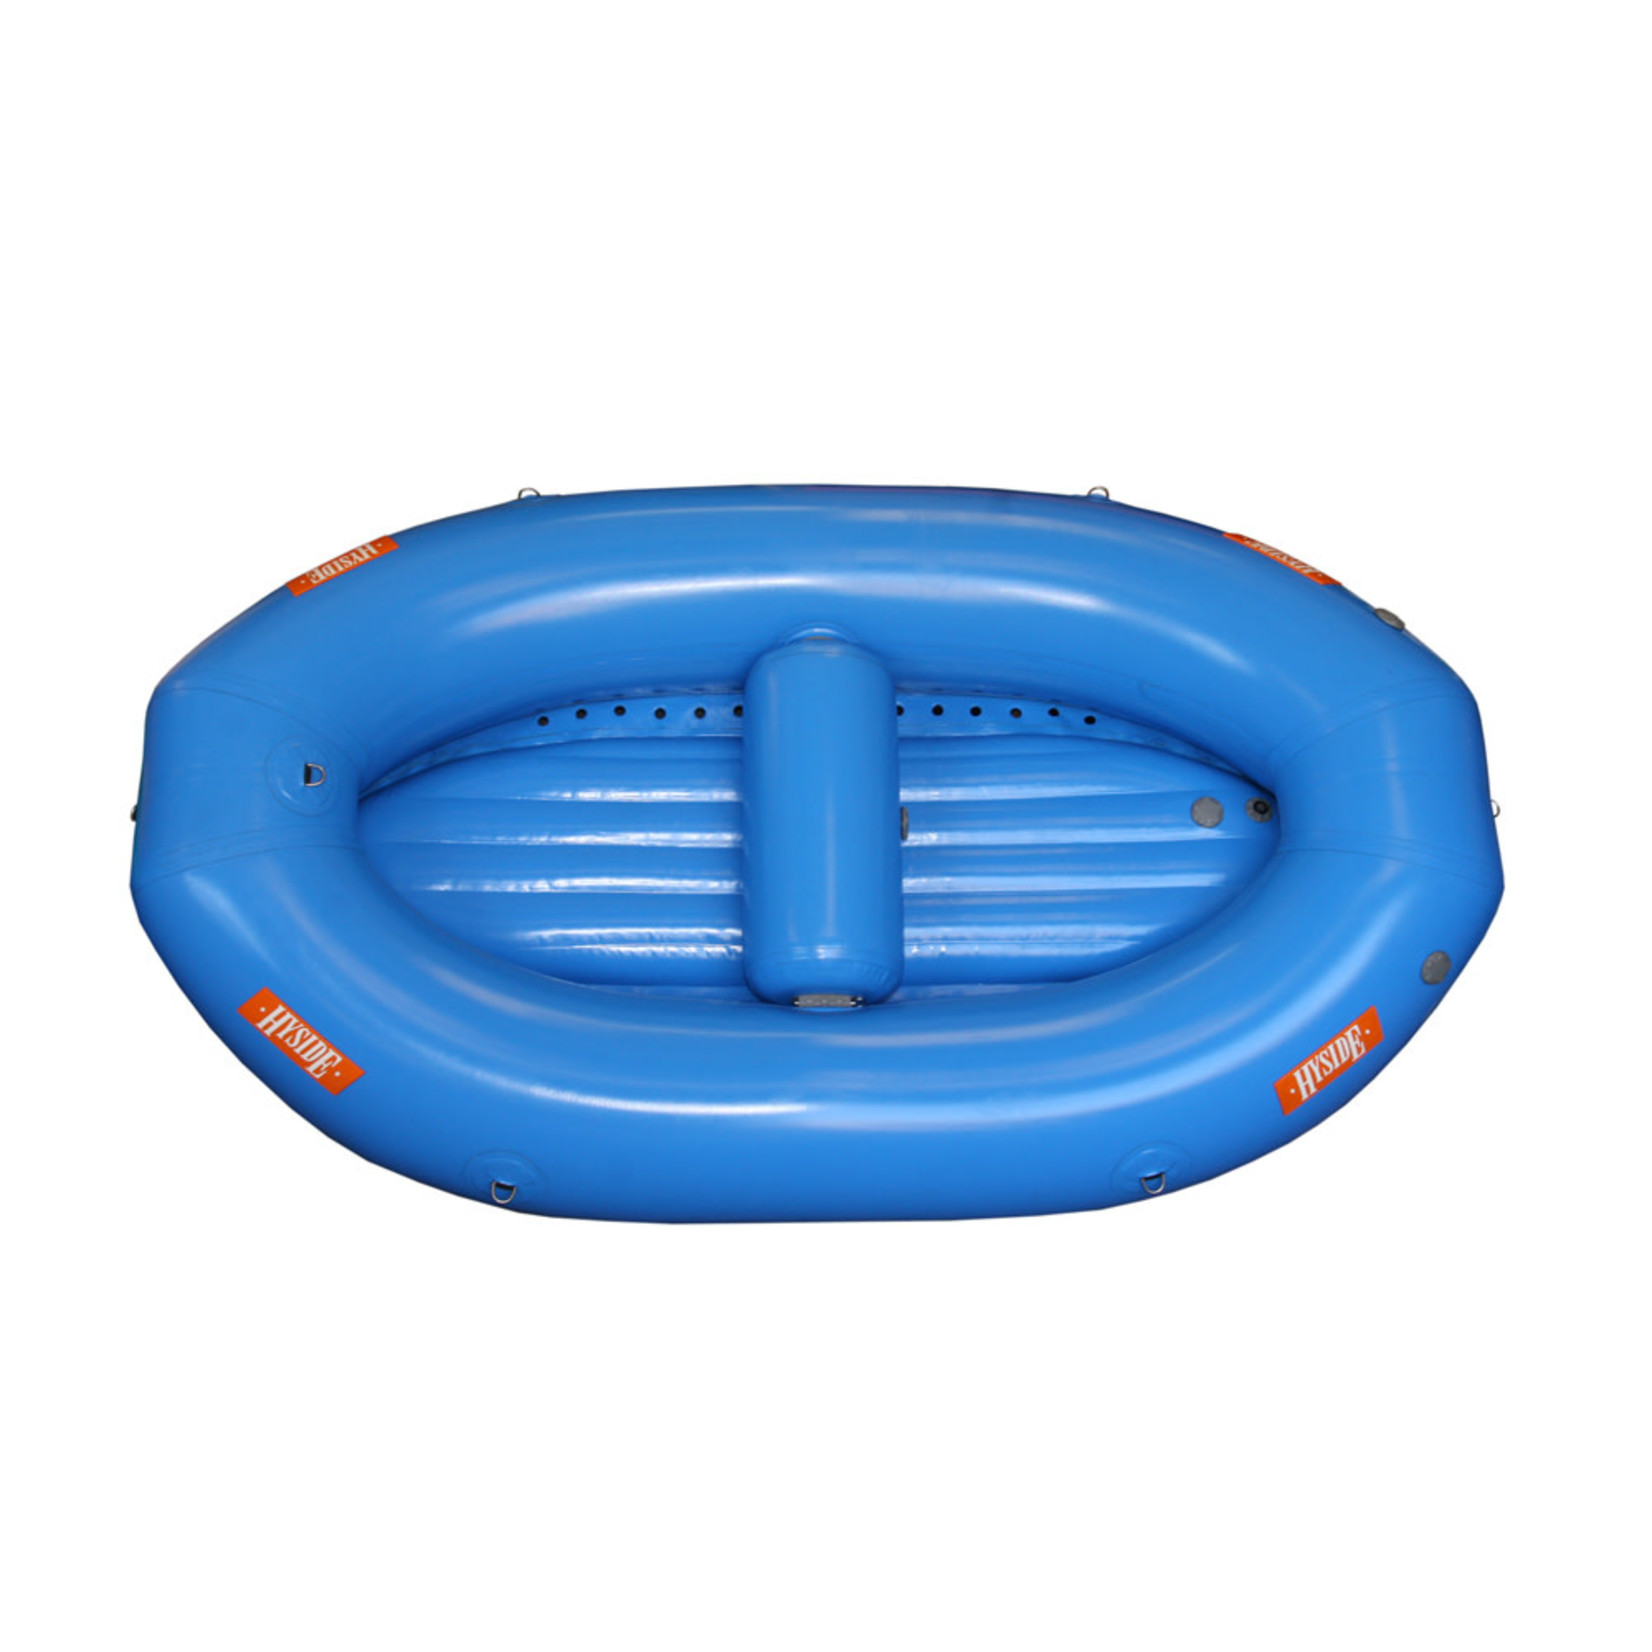 Hyside Inflatables Hyside Outfitter 9.0 Mini-Me Raft